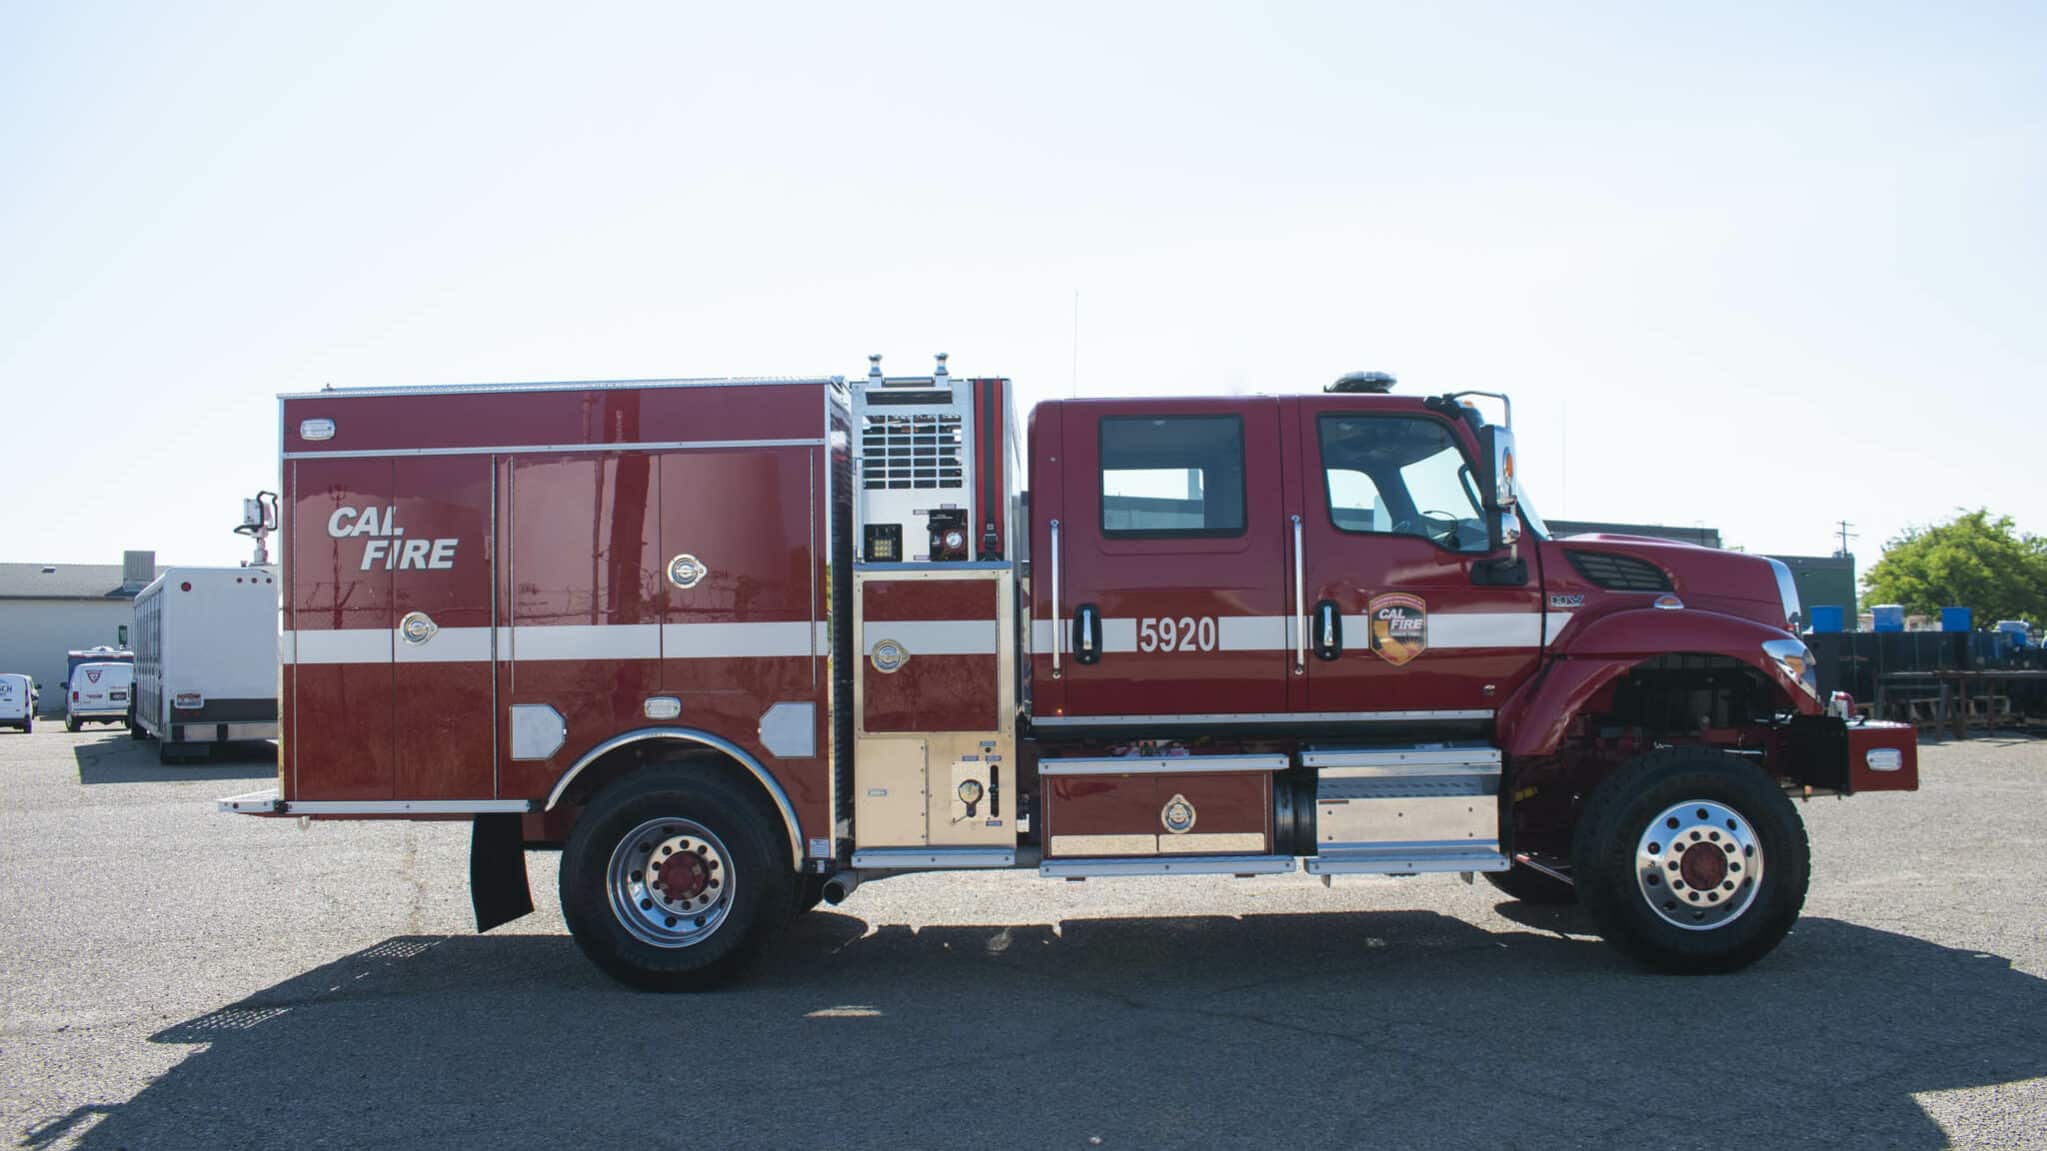 bme delivery 2021 type 3 (model 34) cal fire august 8